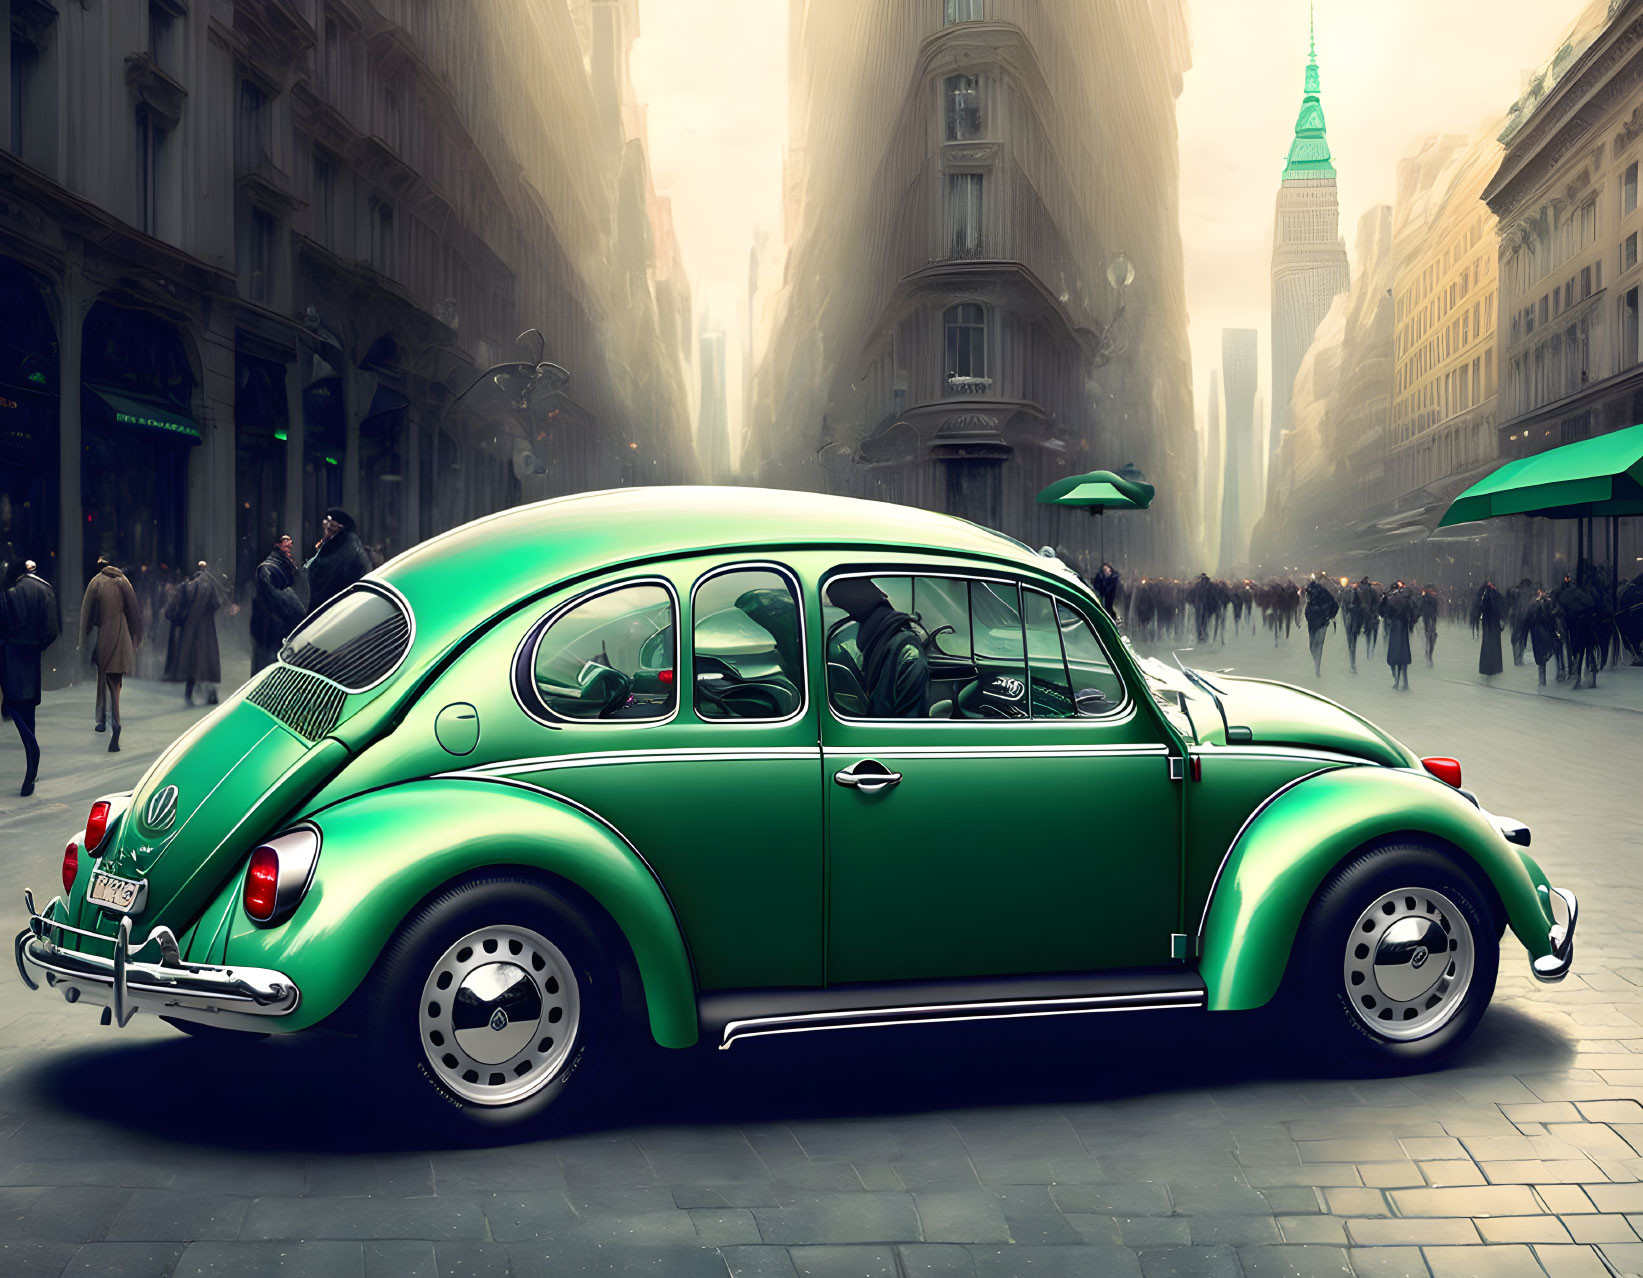 Vintage green Volkswagen Beetle parked on city street with pedestrians and sunrays.